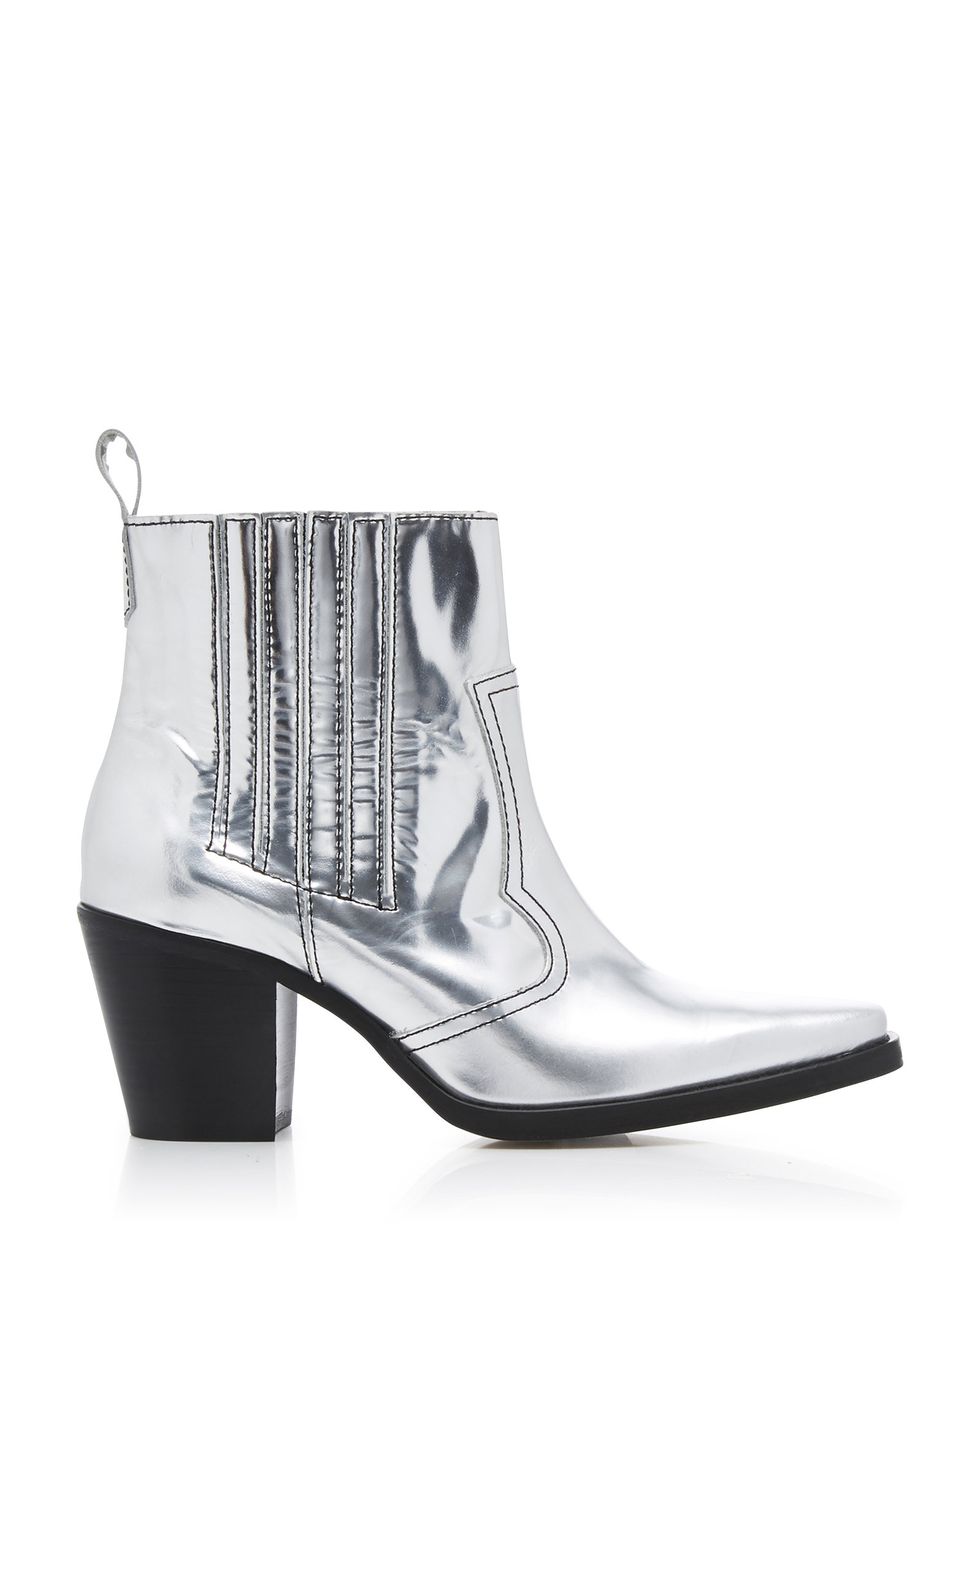 Western Metallic Leather Ankle Boots